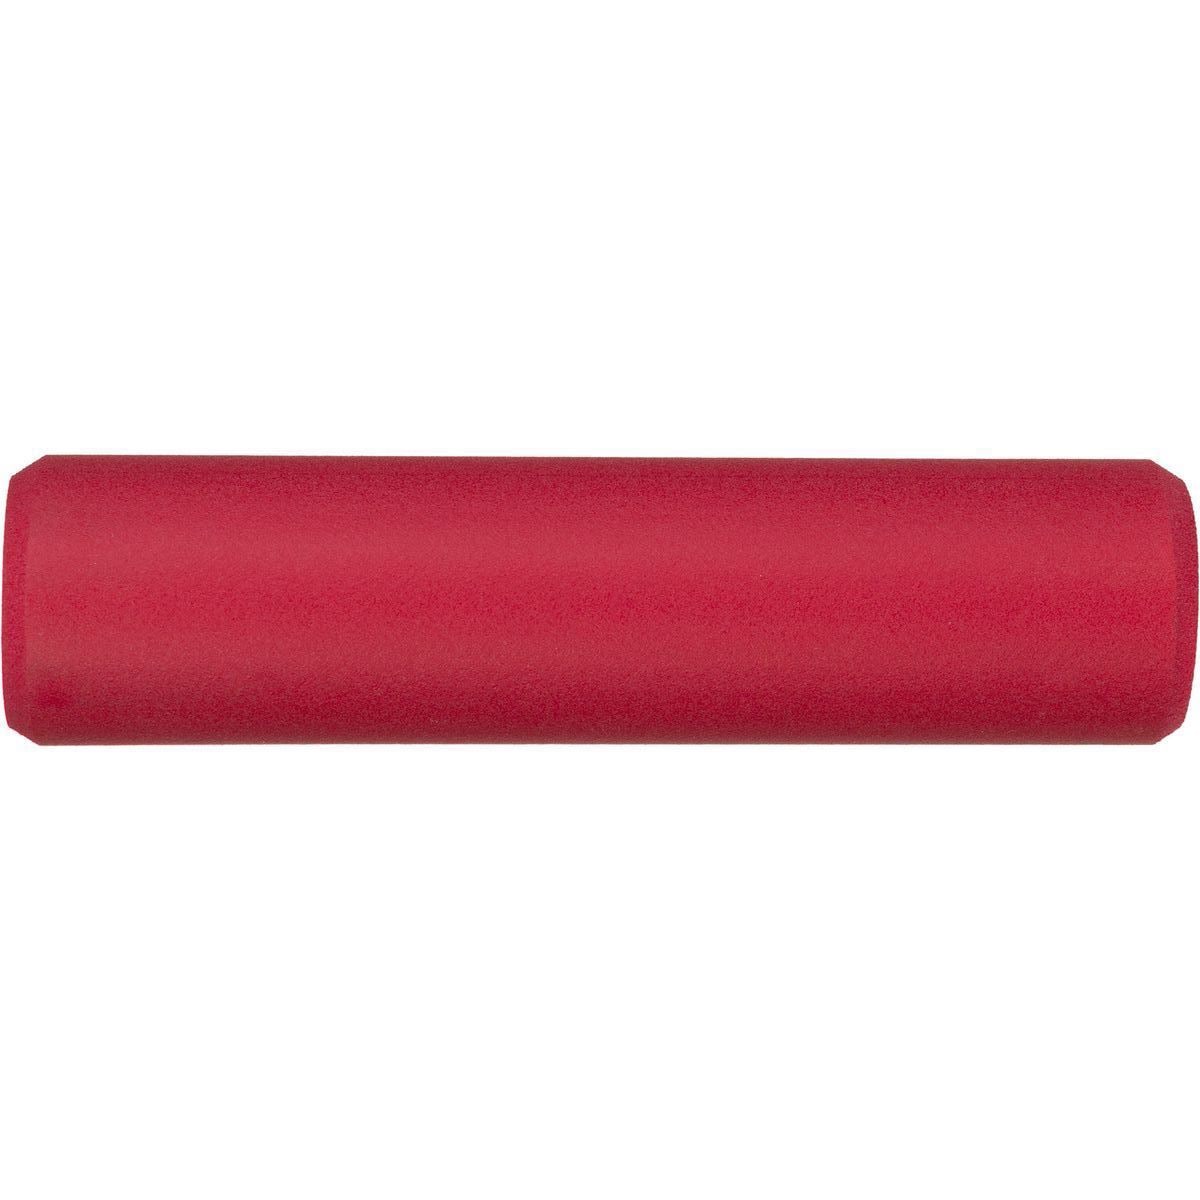 ESI Grips Extra Chunky Mountain Bike Grips Red, One Size